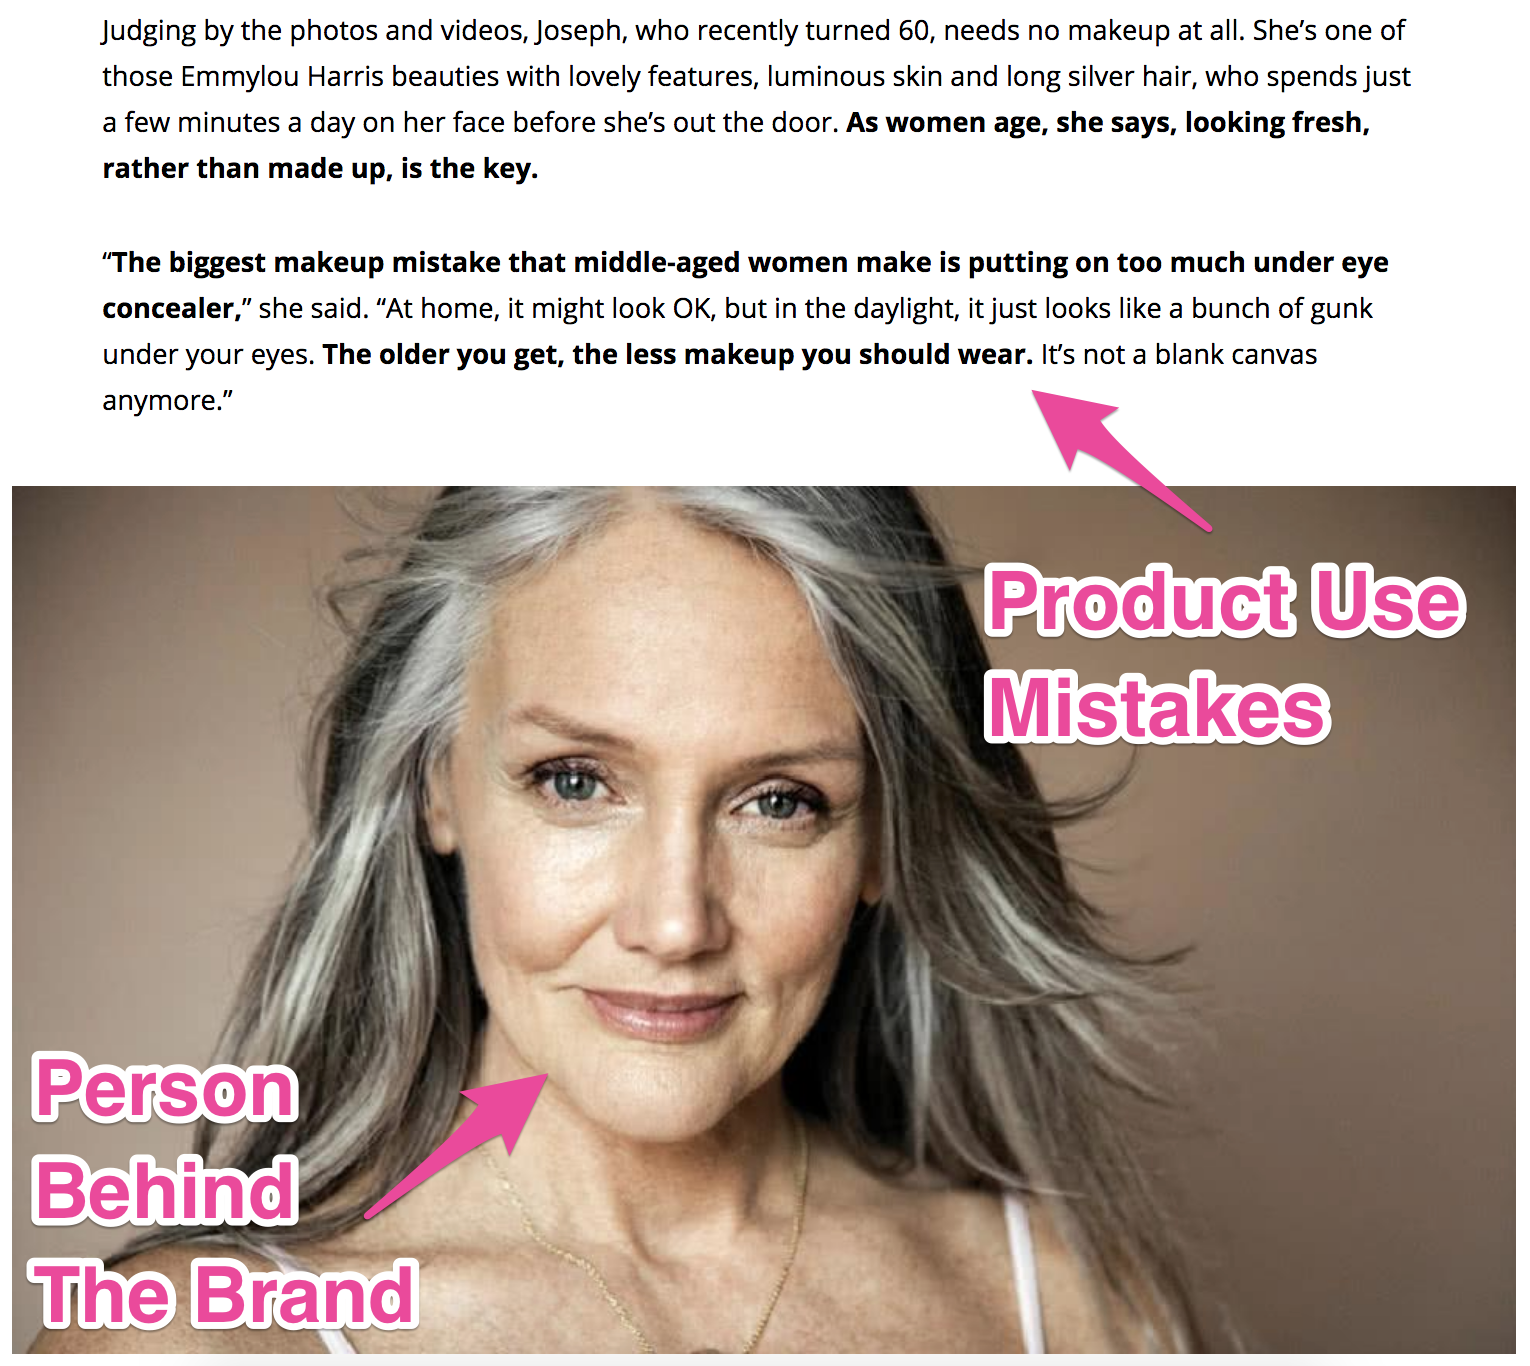 Screenshot showing copy that details mistakes in using a product, and a picture of the person behind the brand